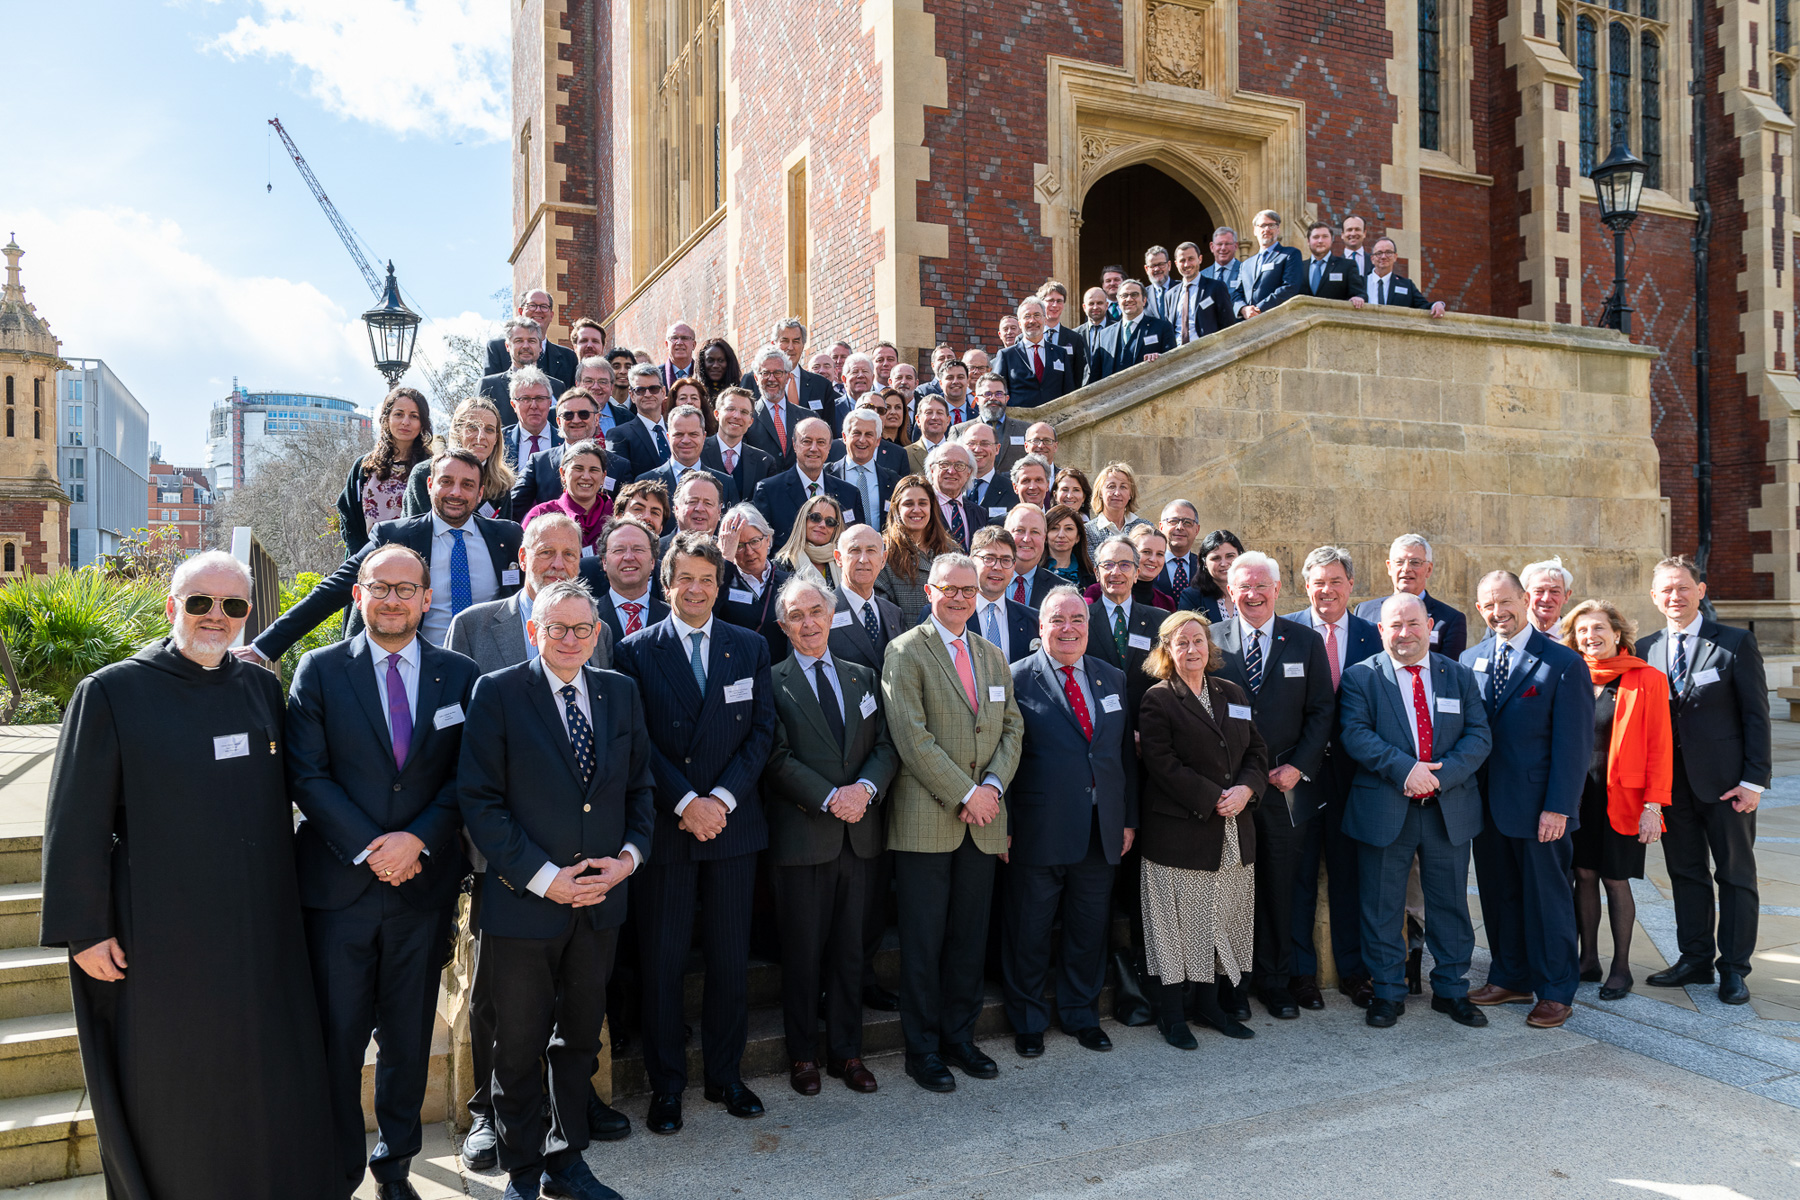 London hosts the 29th International Hospitaller Conference